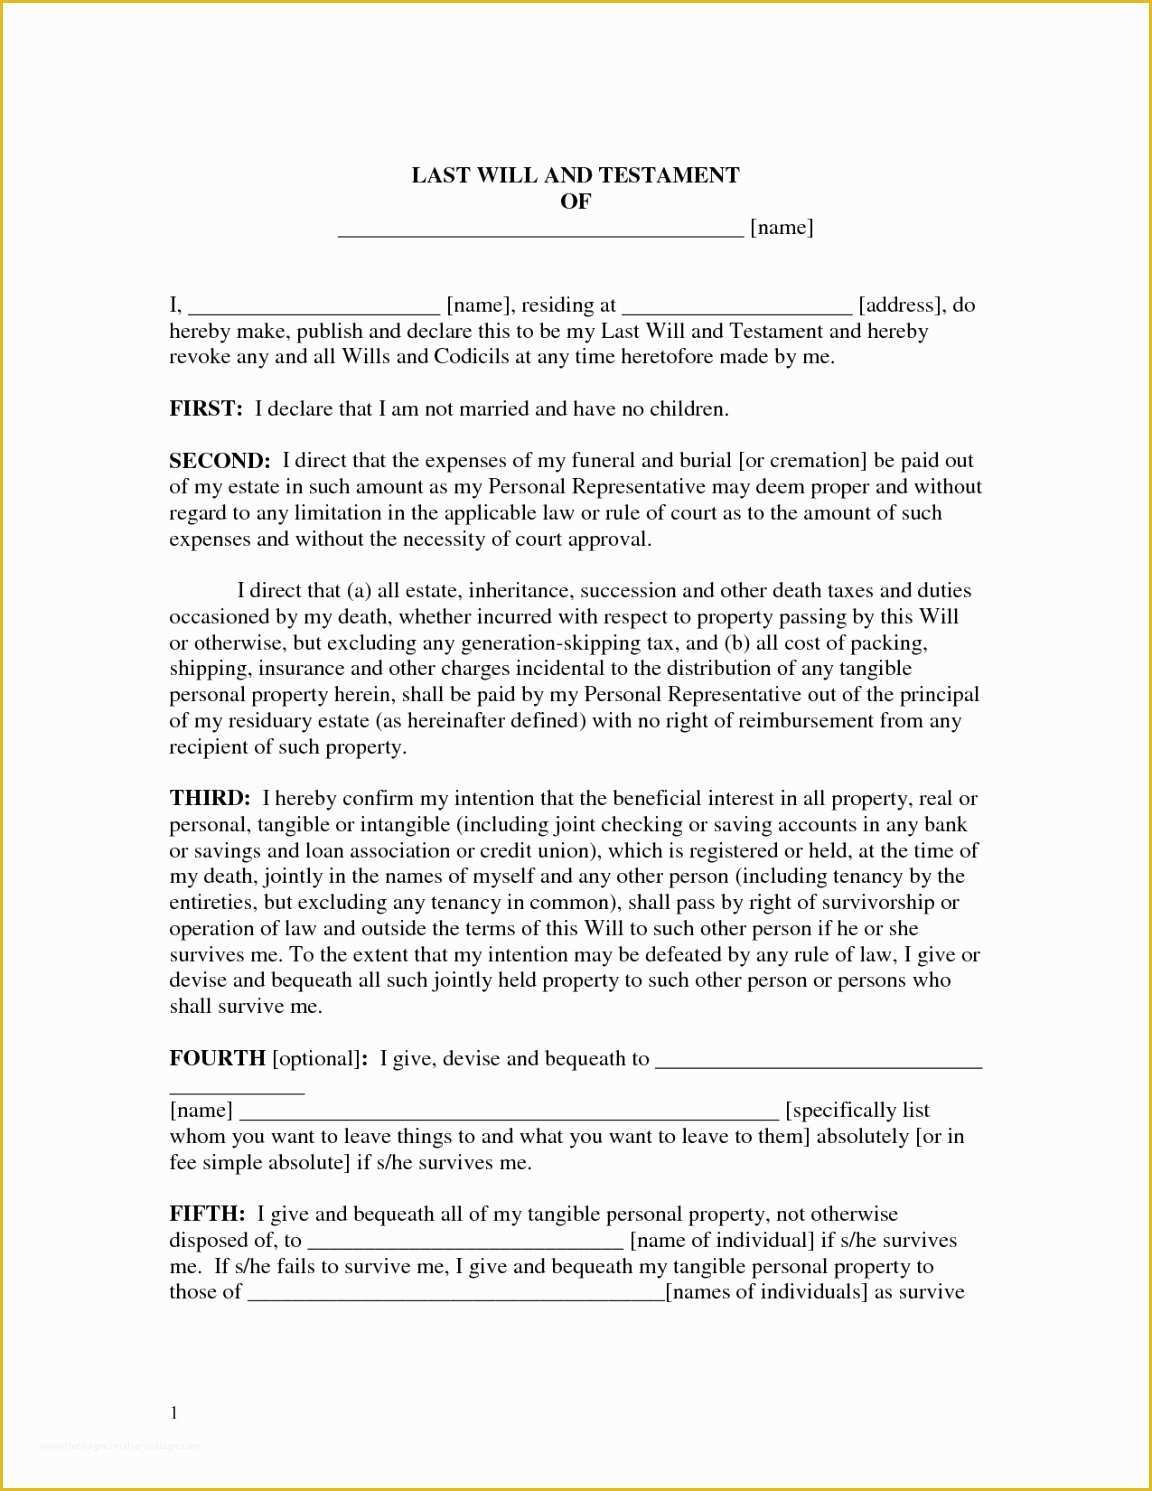 Last Will and Testament Texas Free Template Of Last Will and Testament Template Texas Elegant Will and